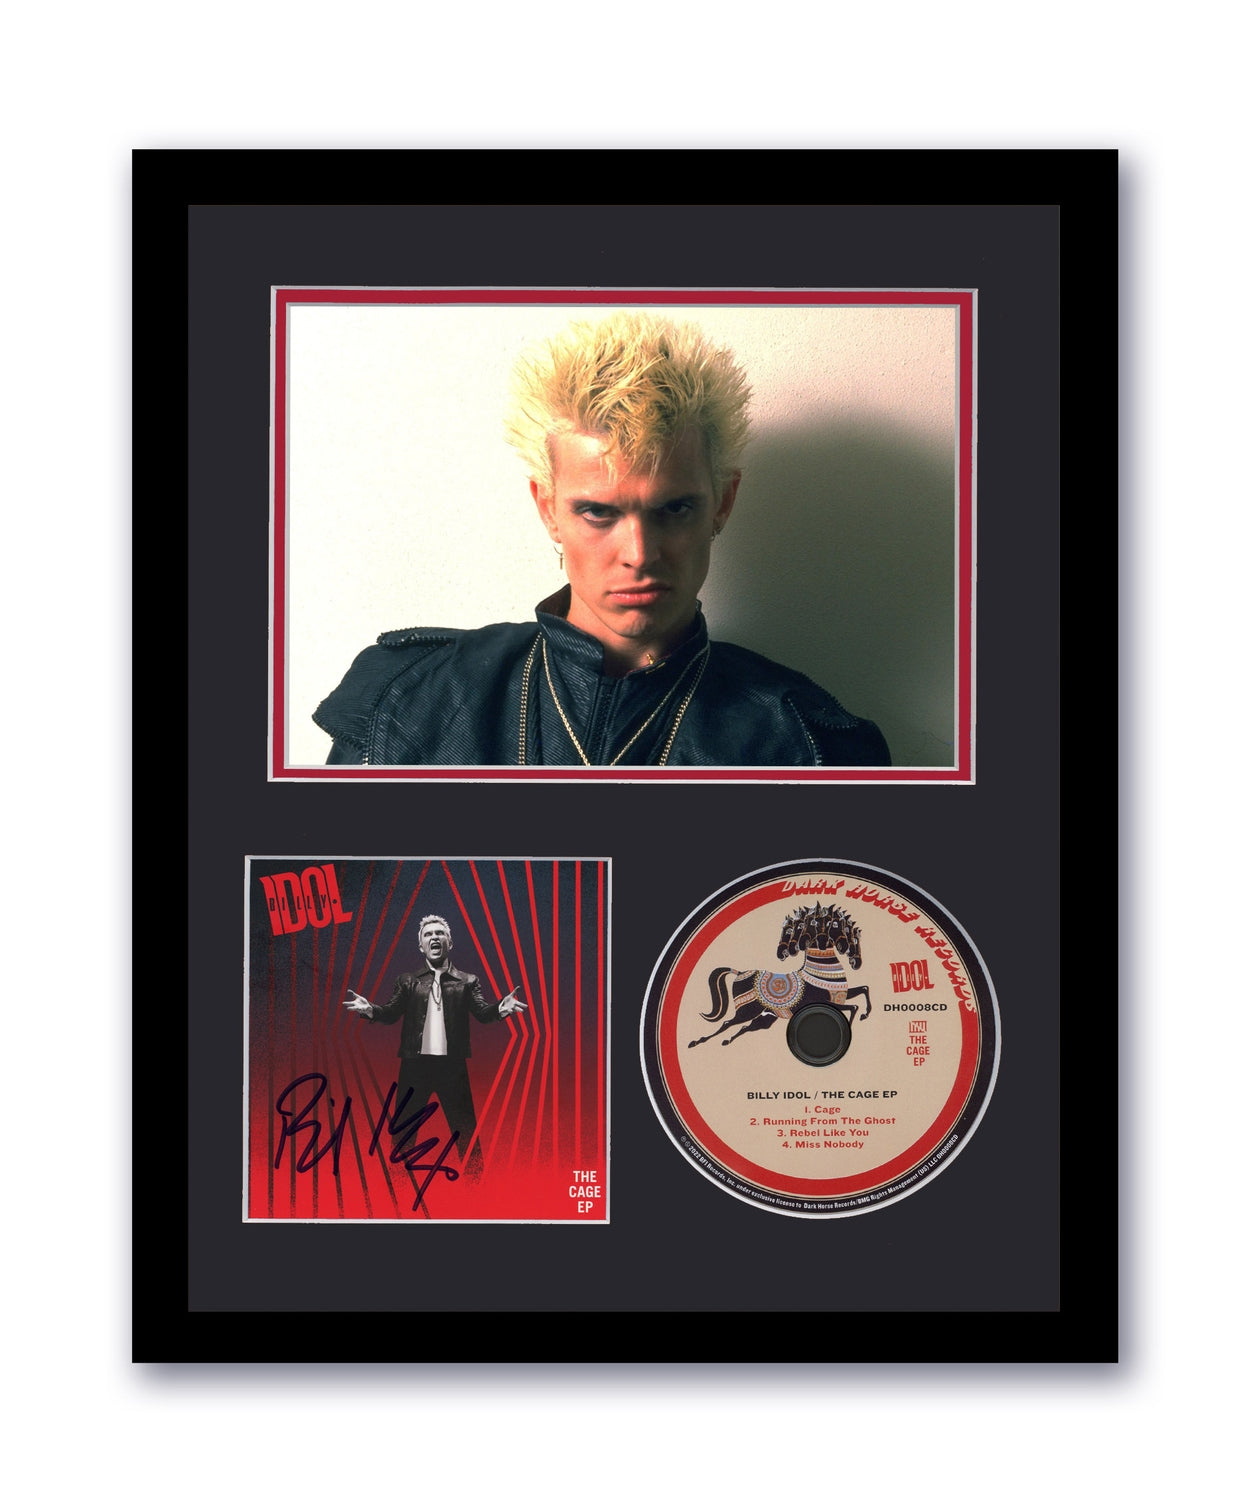 Billy Idol Autographed Signed 11x14 Framed CD The Cage EP ACOA 5